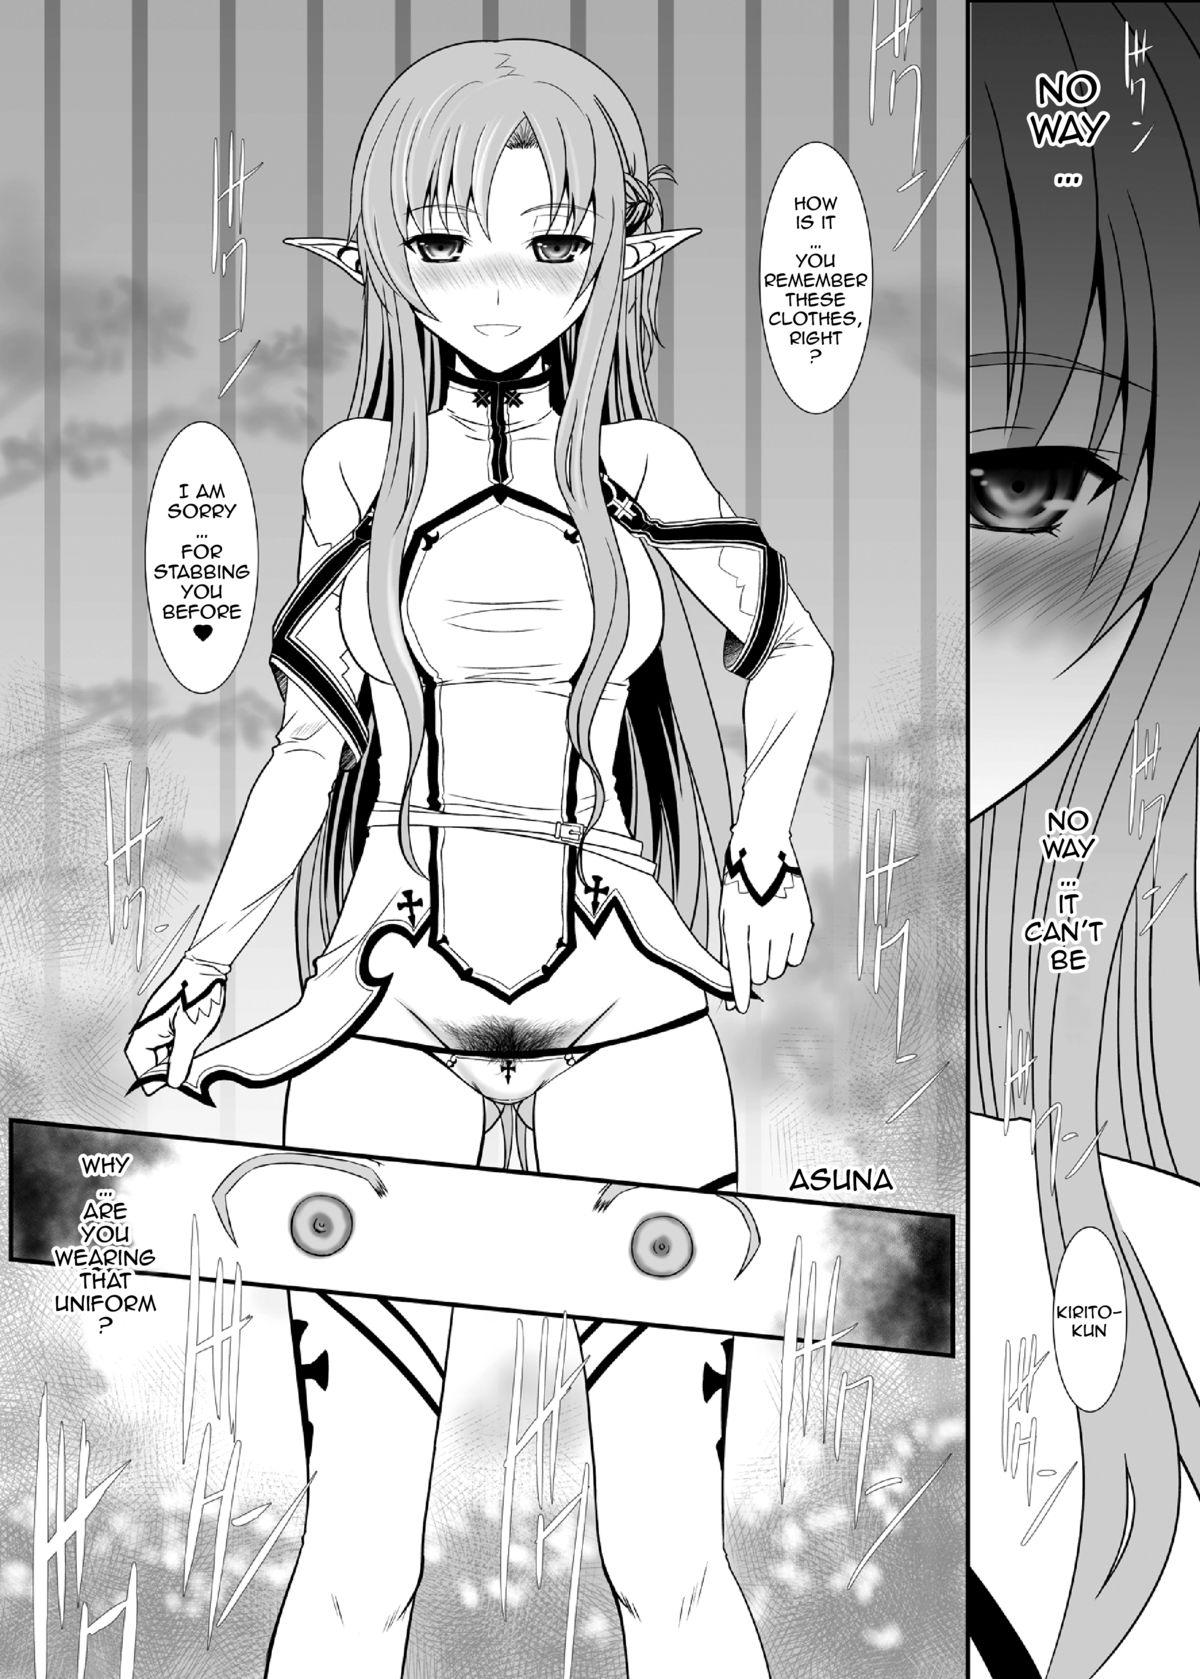 Awesome Slave Asuna On-Demand 2 - Sword art online Dick Suckers - Page 9